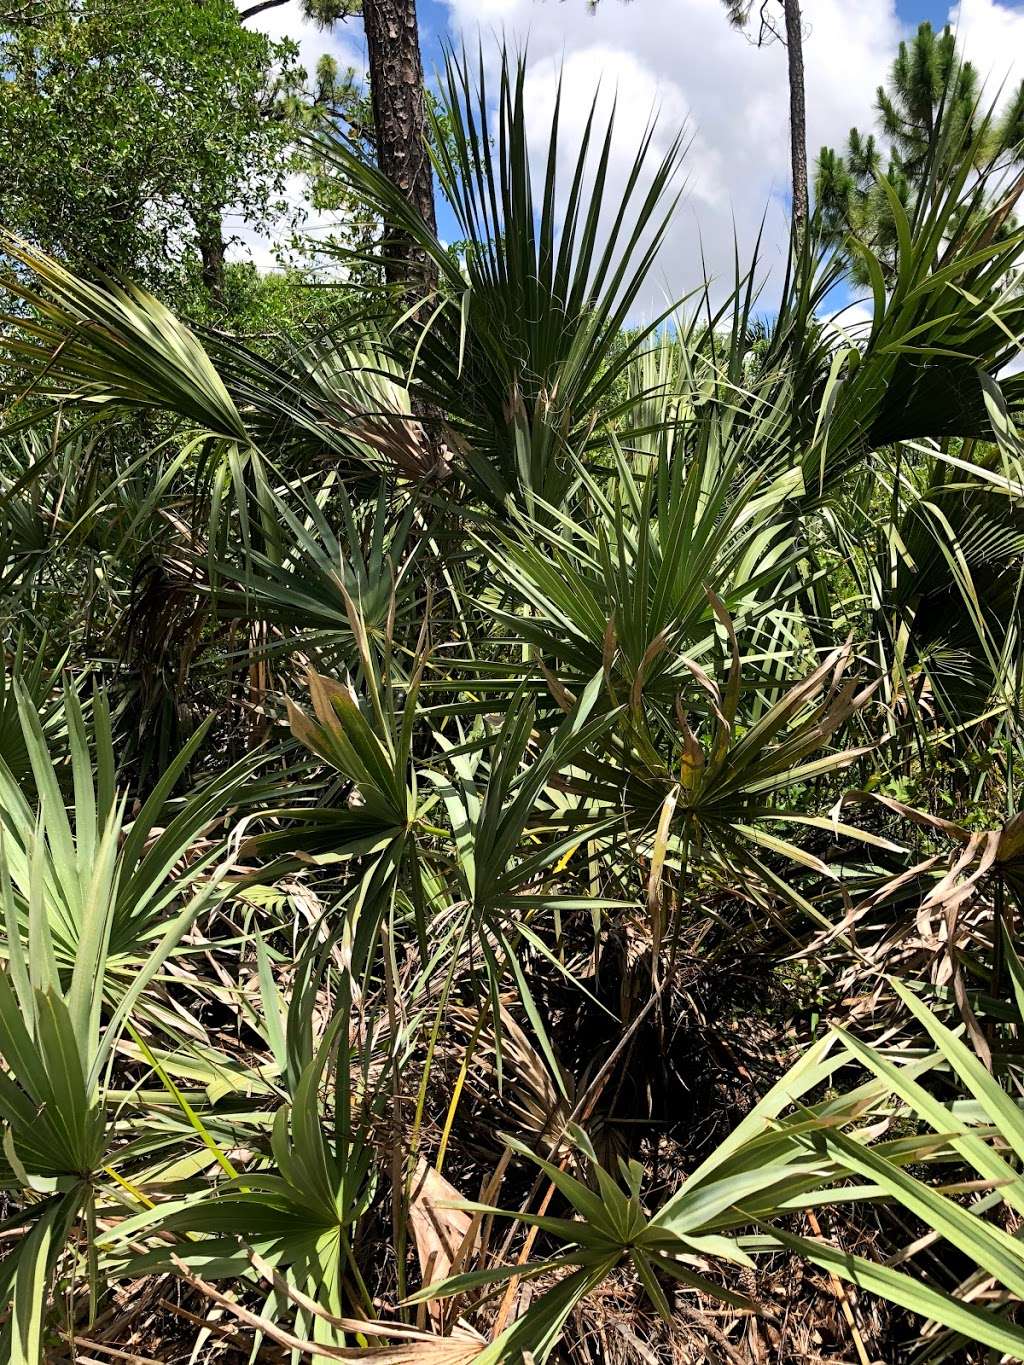 Saw Palmetto Natural Area | 7097 NW 71st St, Coconut Creek, FL 33073, USA | Phone: (954) 357-5100